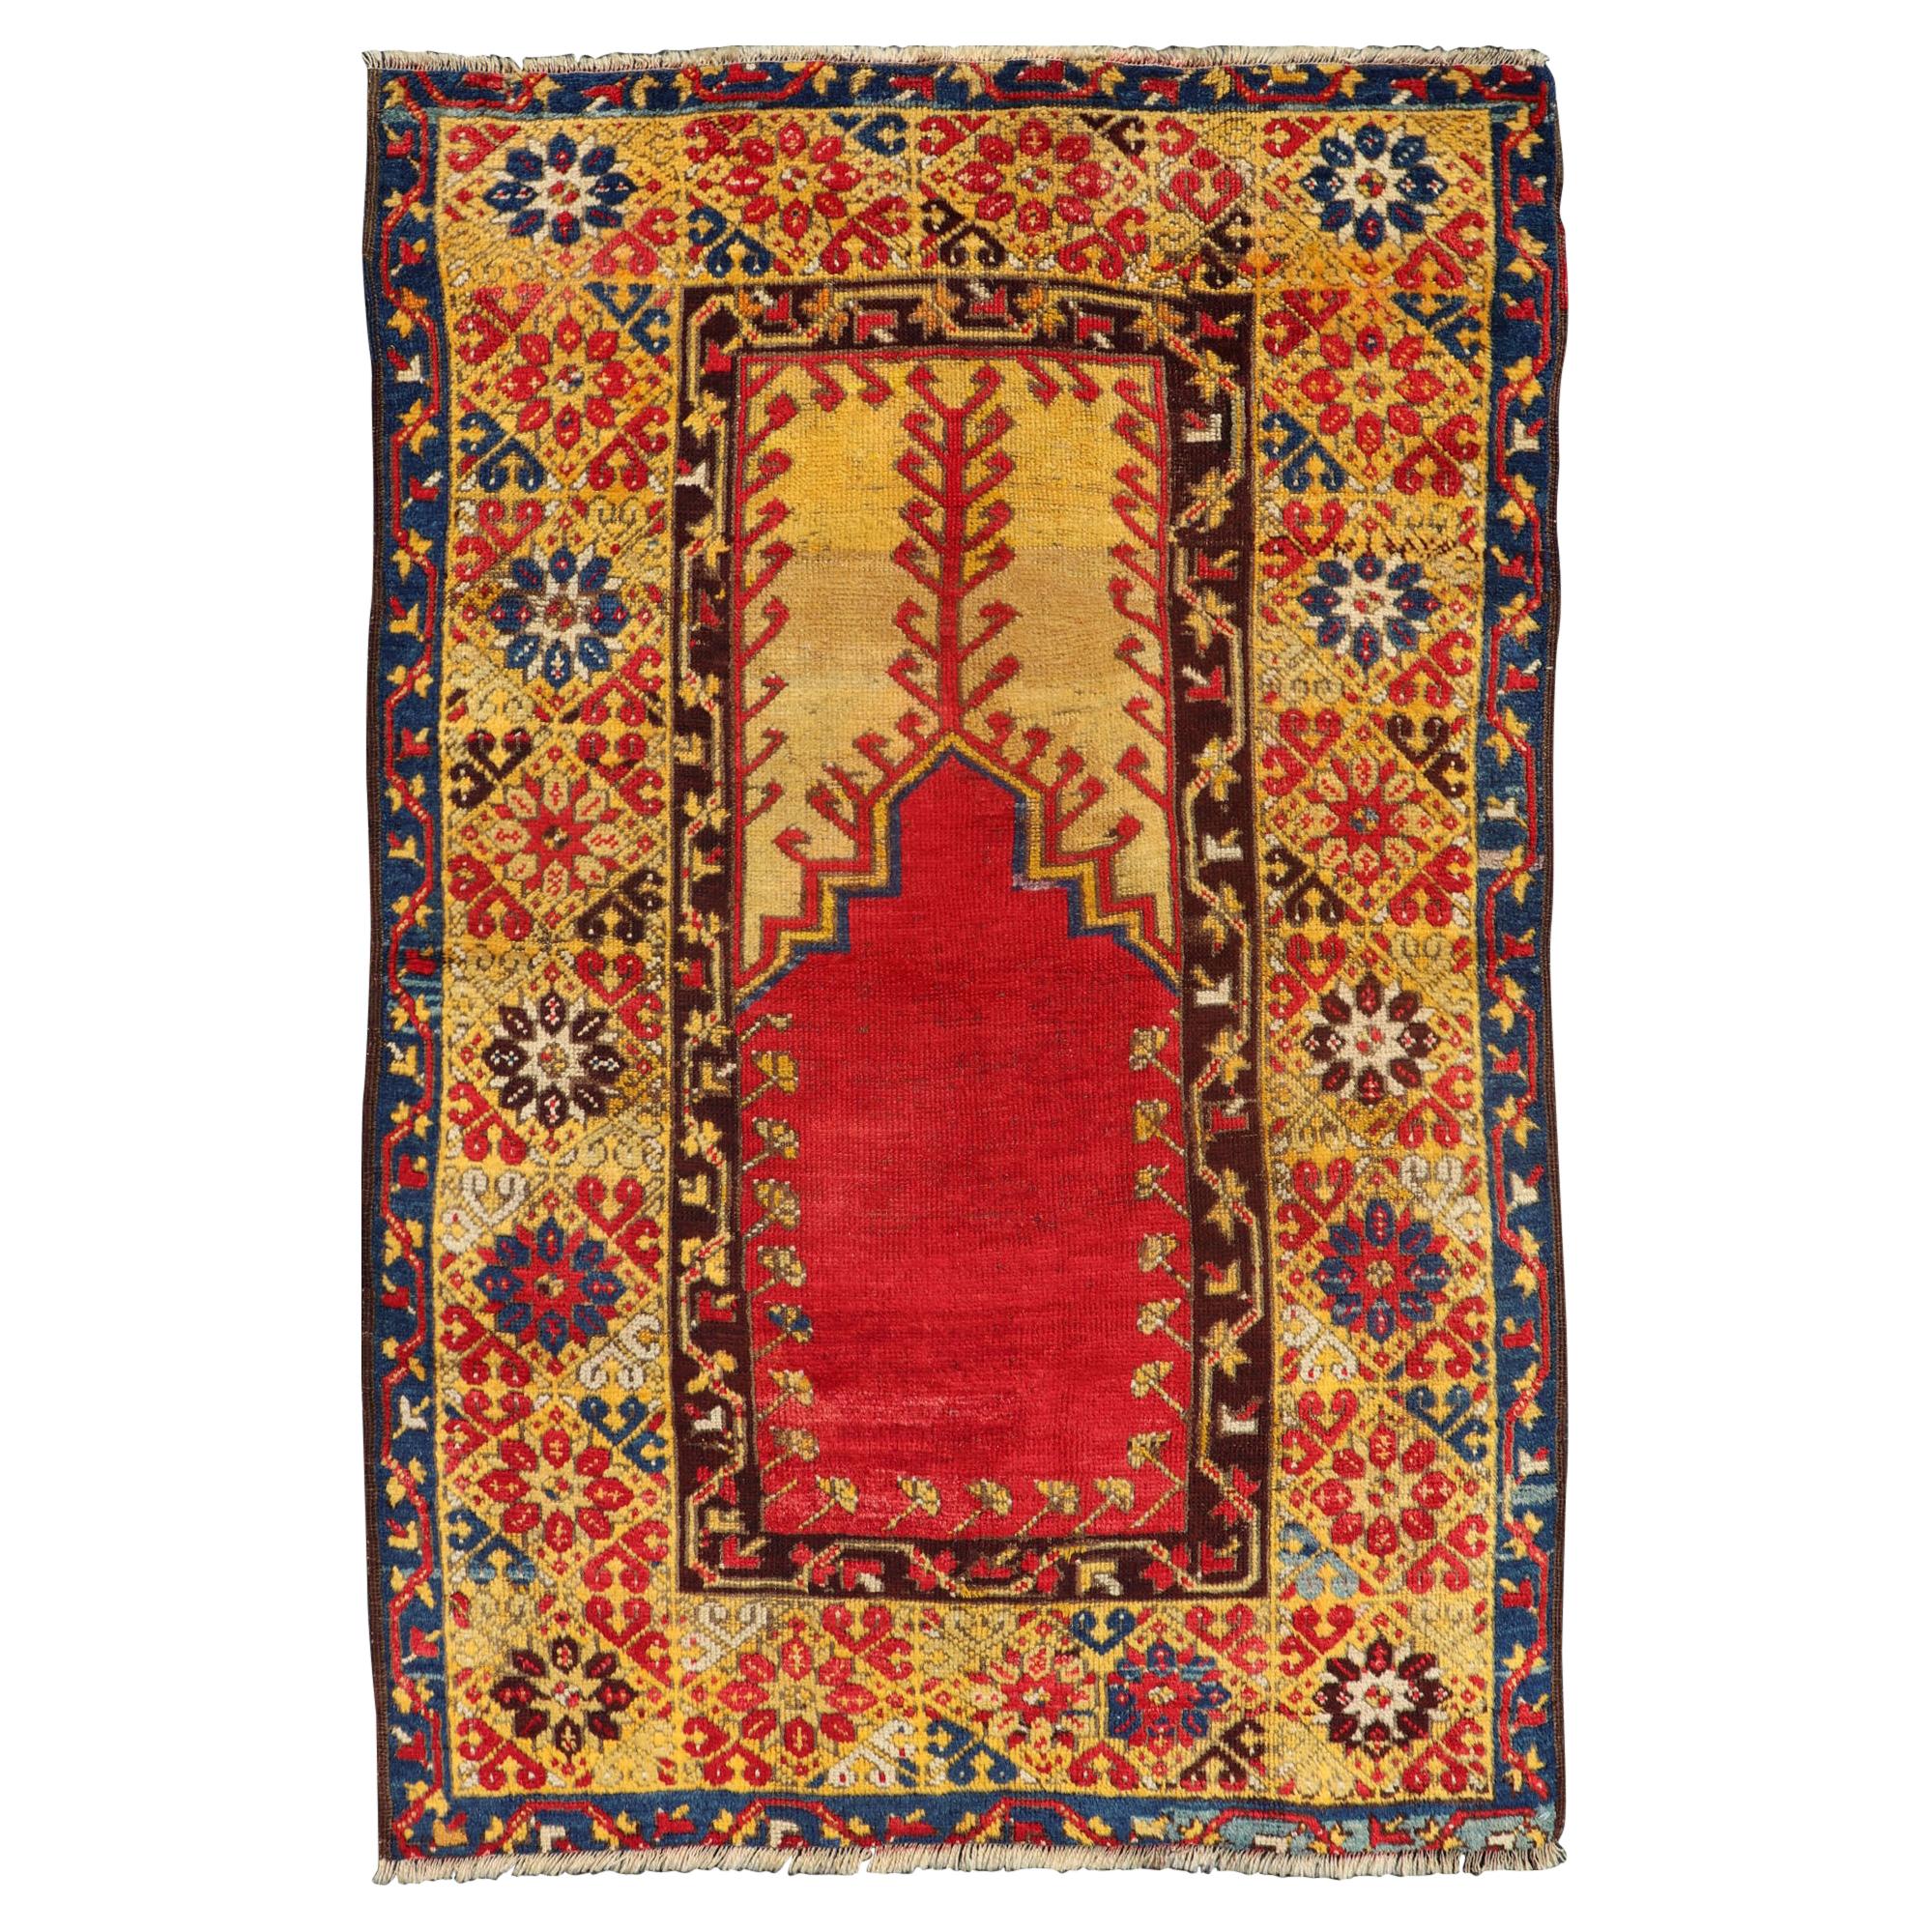 Antique Turkish Prayer Rug in Vibrant Saffron Yellow, Gold, Red and Blue For Sale